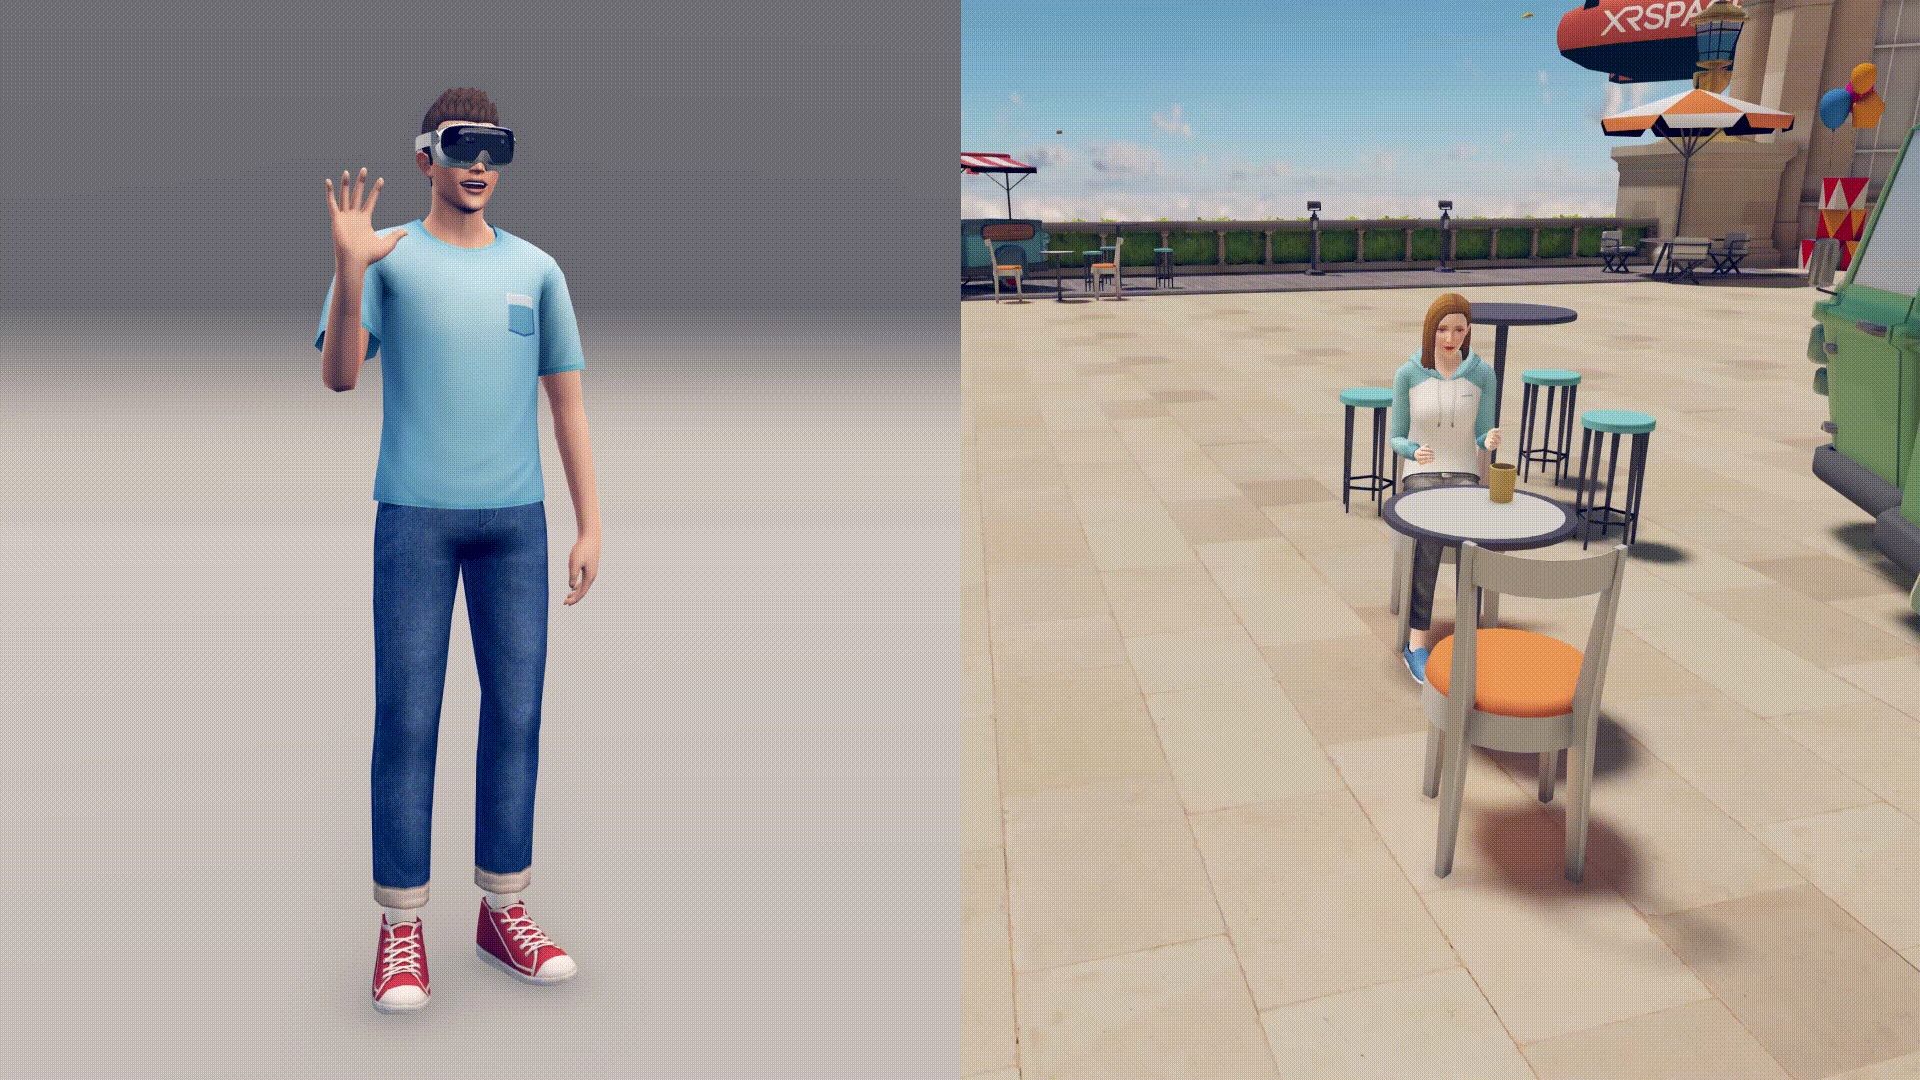 Is this the future of VR? Social interaction in a virtual socially distanced world photo 7